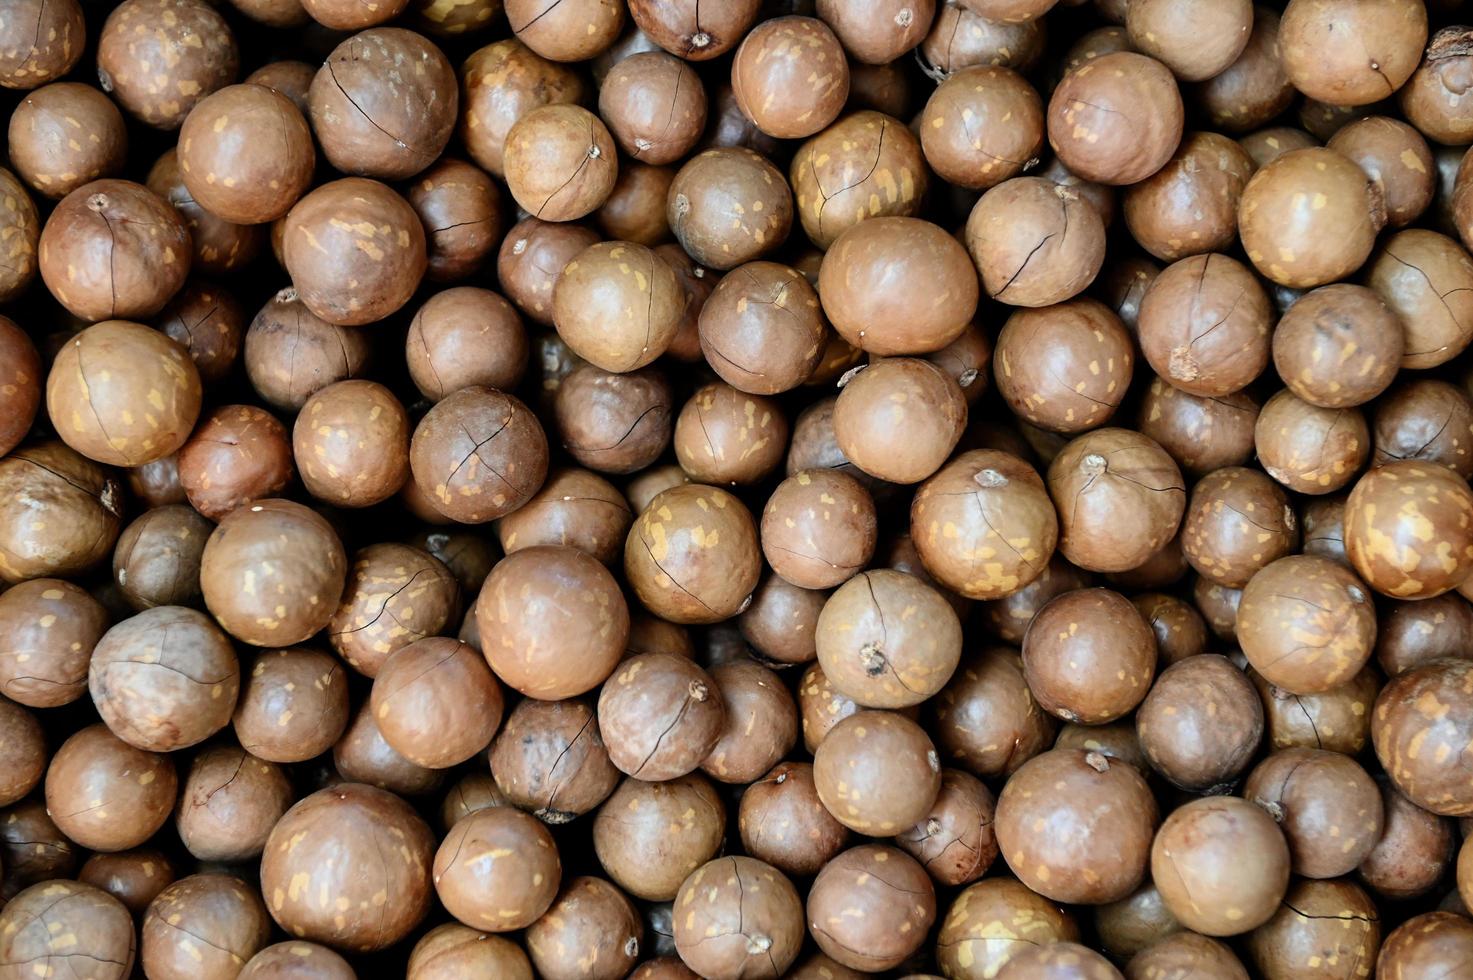 macadamia nuts texture background, fresh natural shelled raw macadamia nuts in a full frame, close up pile of roasted macadamia nut photo